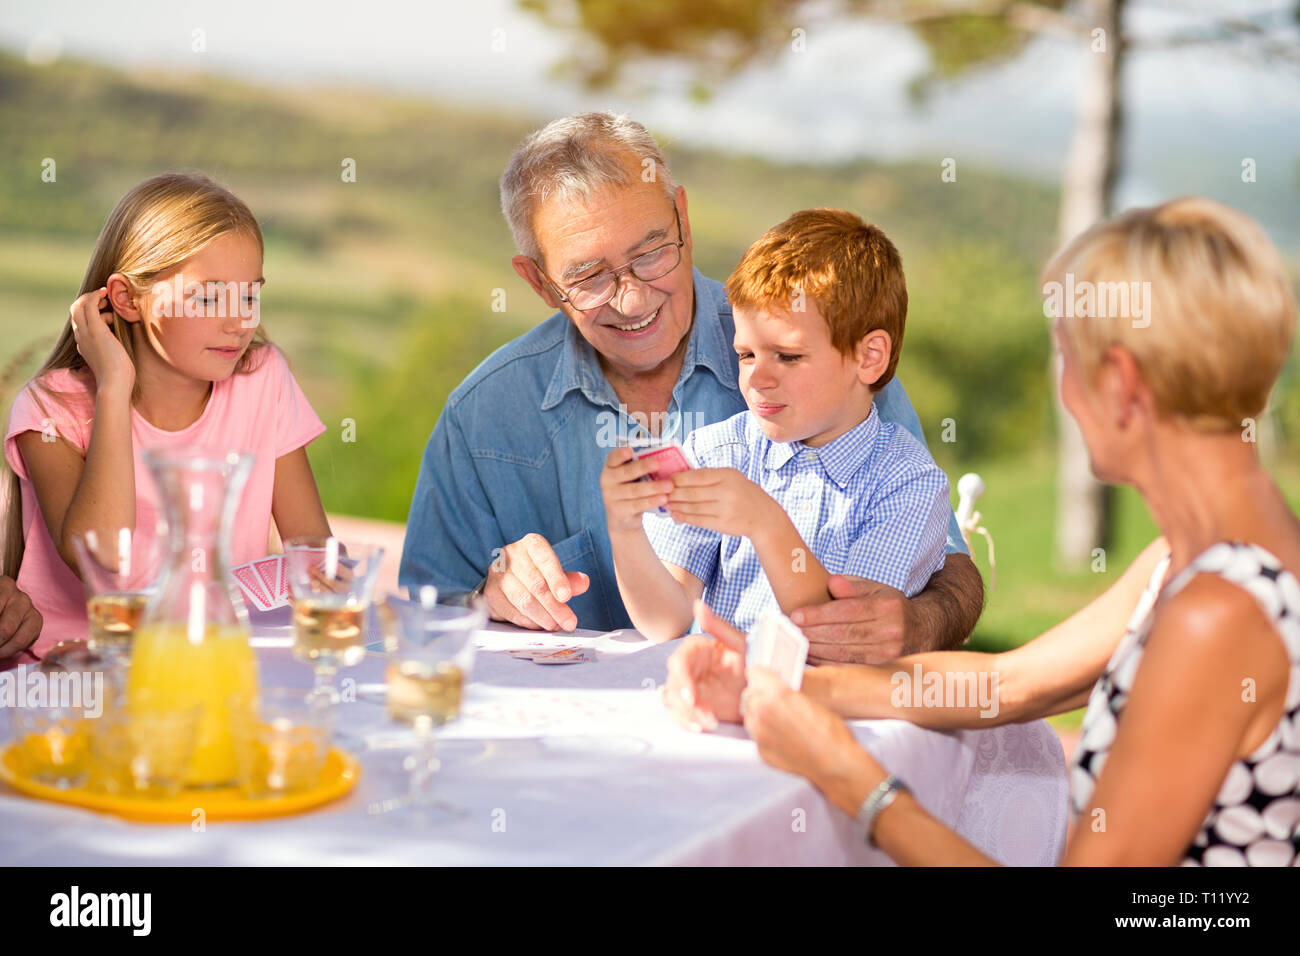 family, leisure, games and lifestyle concept Stock Photo